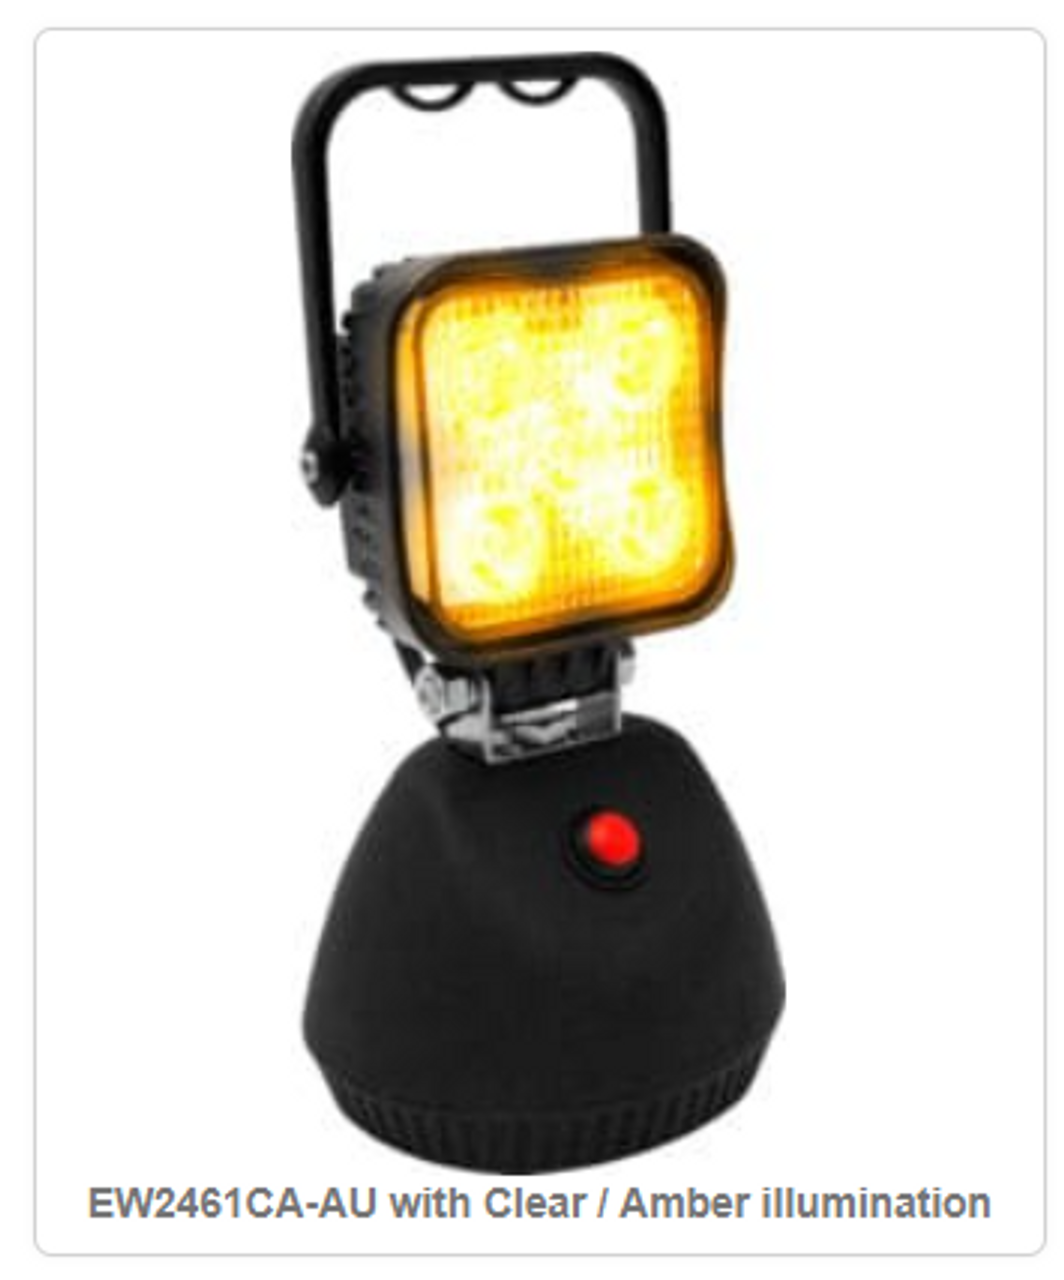 Battery Operated, Rechargeable, Magnetic Base, Flood Light. 12v or 24v DC and 240v AC Charger. White & Amber LED's with Emergency Strobe Amber Function